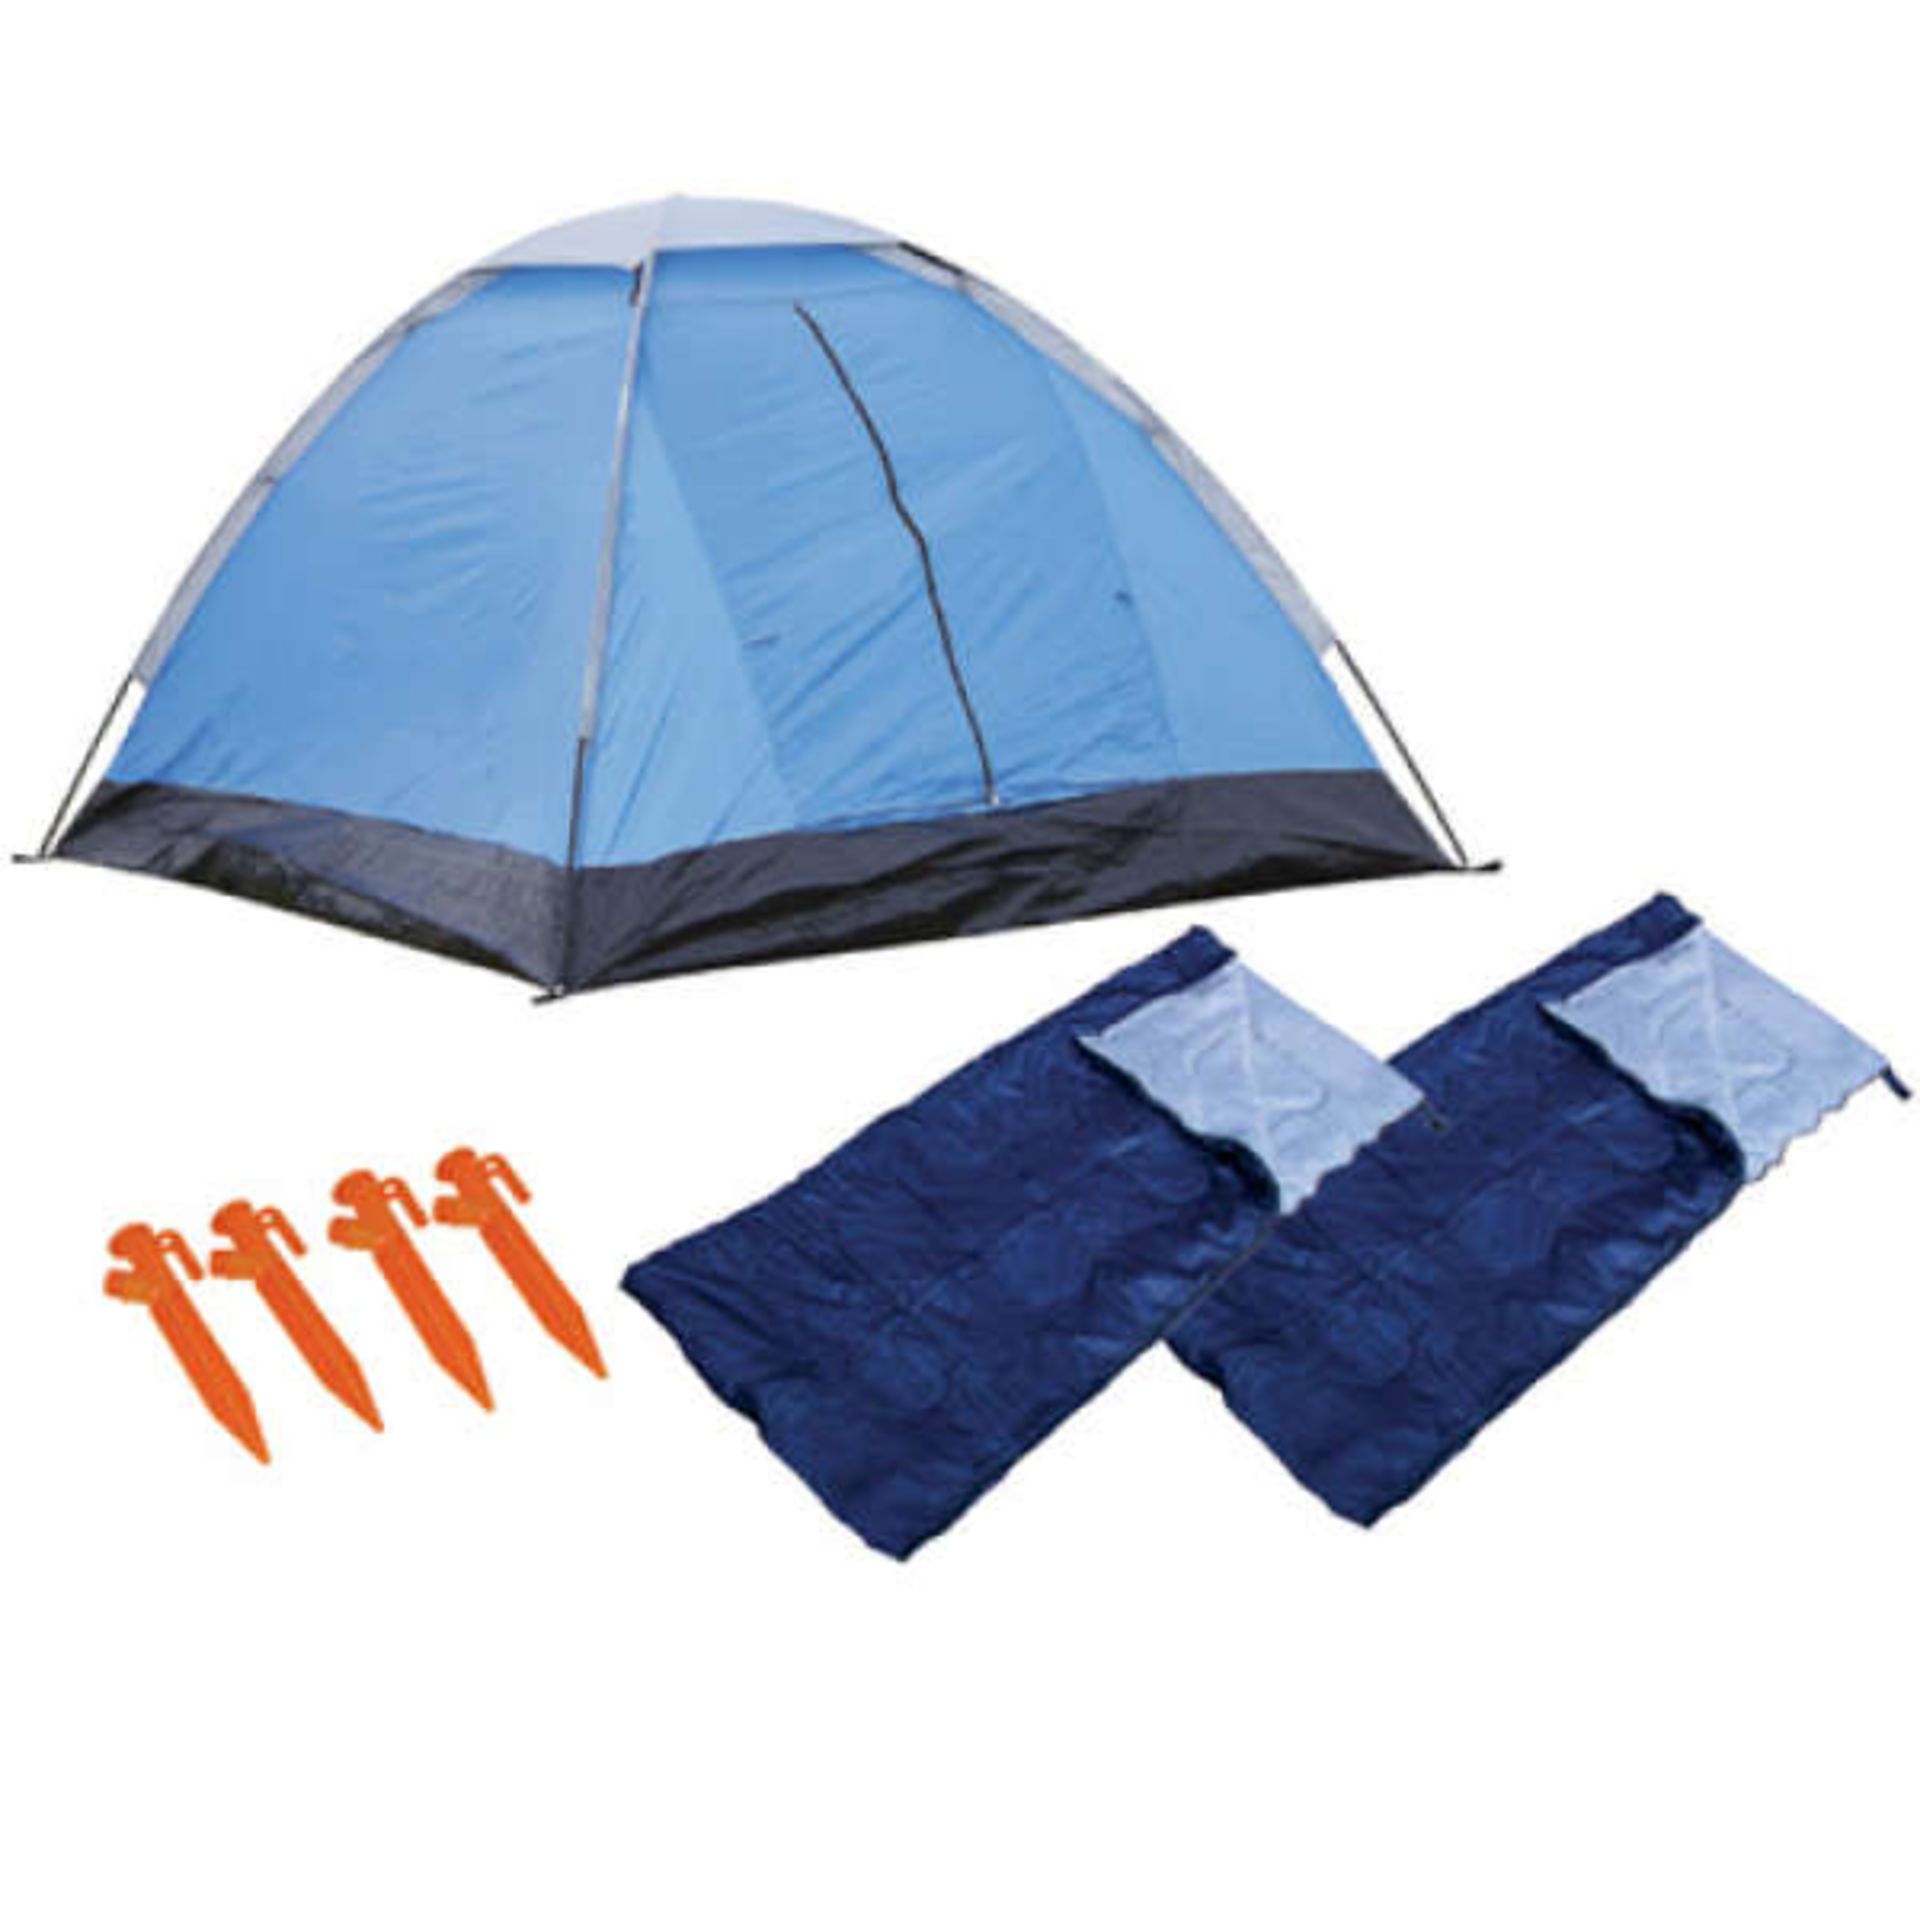 V Grade A Festival Camping Kit Containing Two Person Tent - Two Sleeping Bags And Four LED Tent Pegs